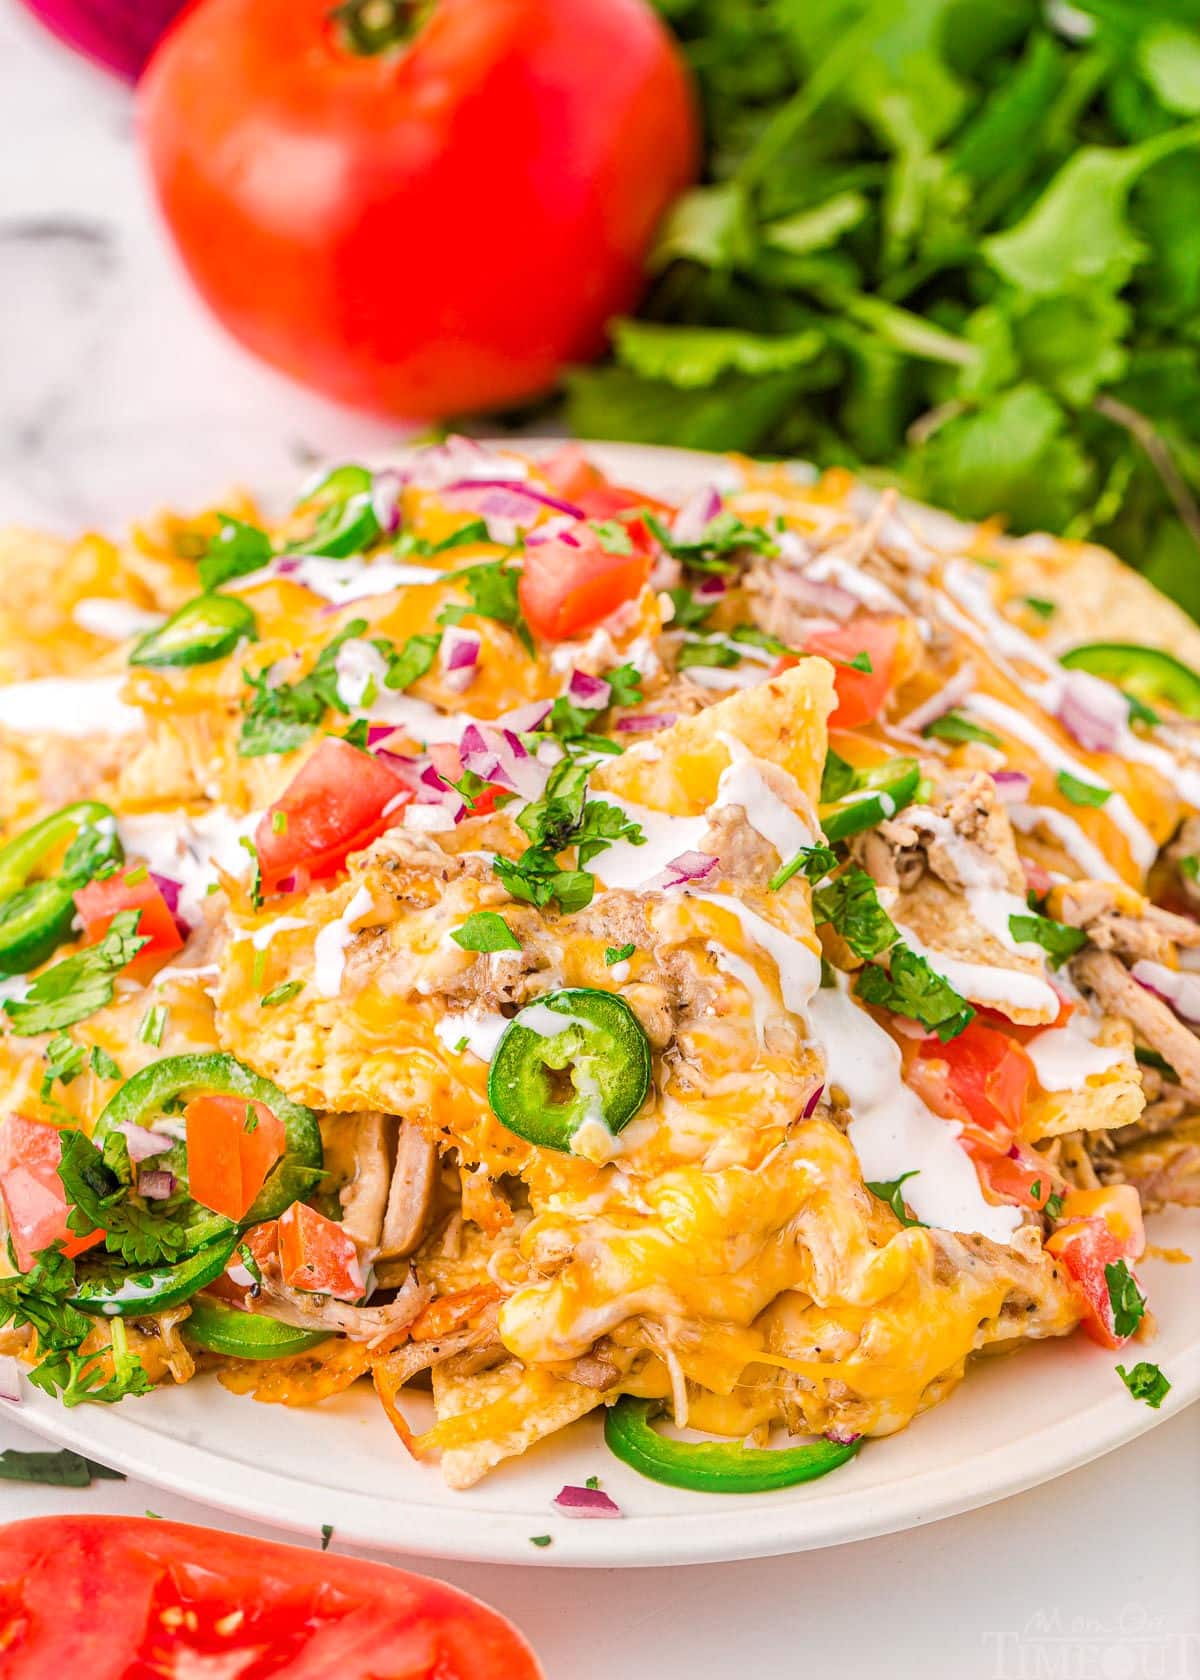 round white plate loaded high with pulled pork nachos topped with sour cream, jalapenos, tomatoes and red onions.  a whole tomato and cilantro can be seen in the background.